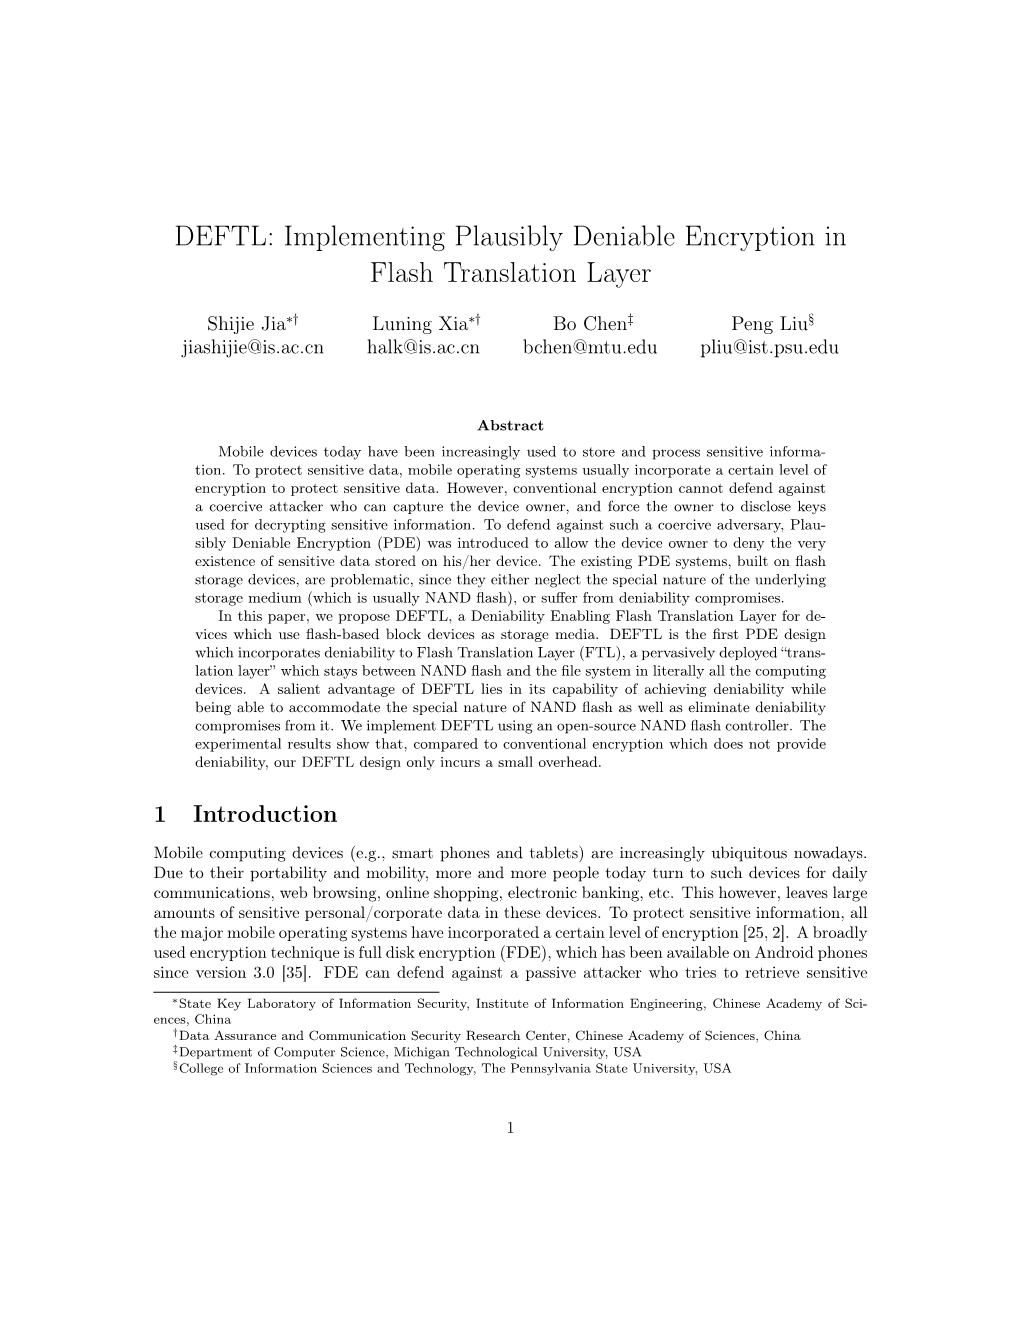 DEFTL: Implementing Plausibly Deniable Encryption in Flash Translation Layer